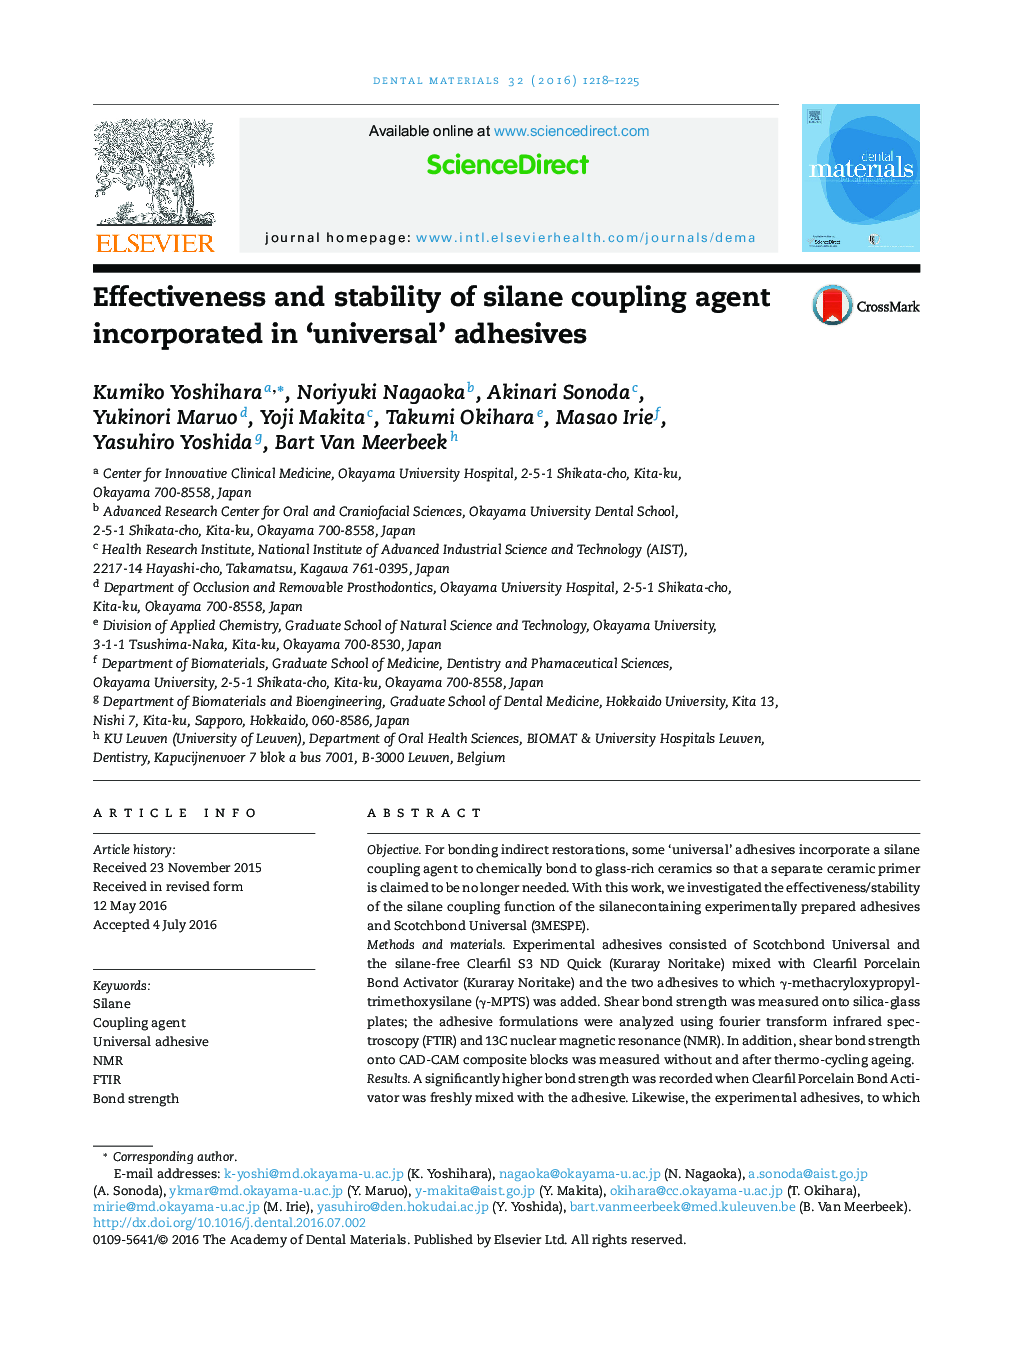 Effectiveness and stability of silane coupling agent incorporated in 'universal' adhesives